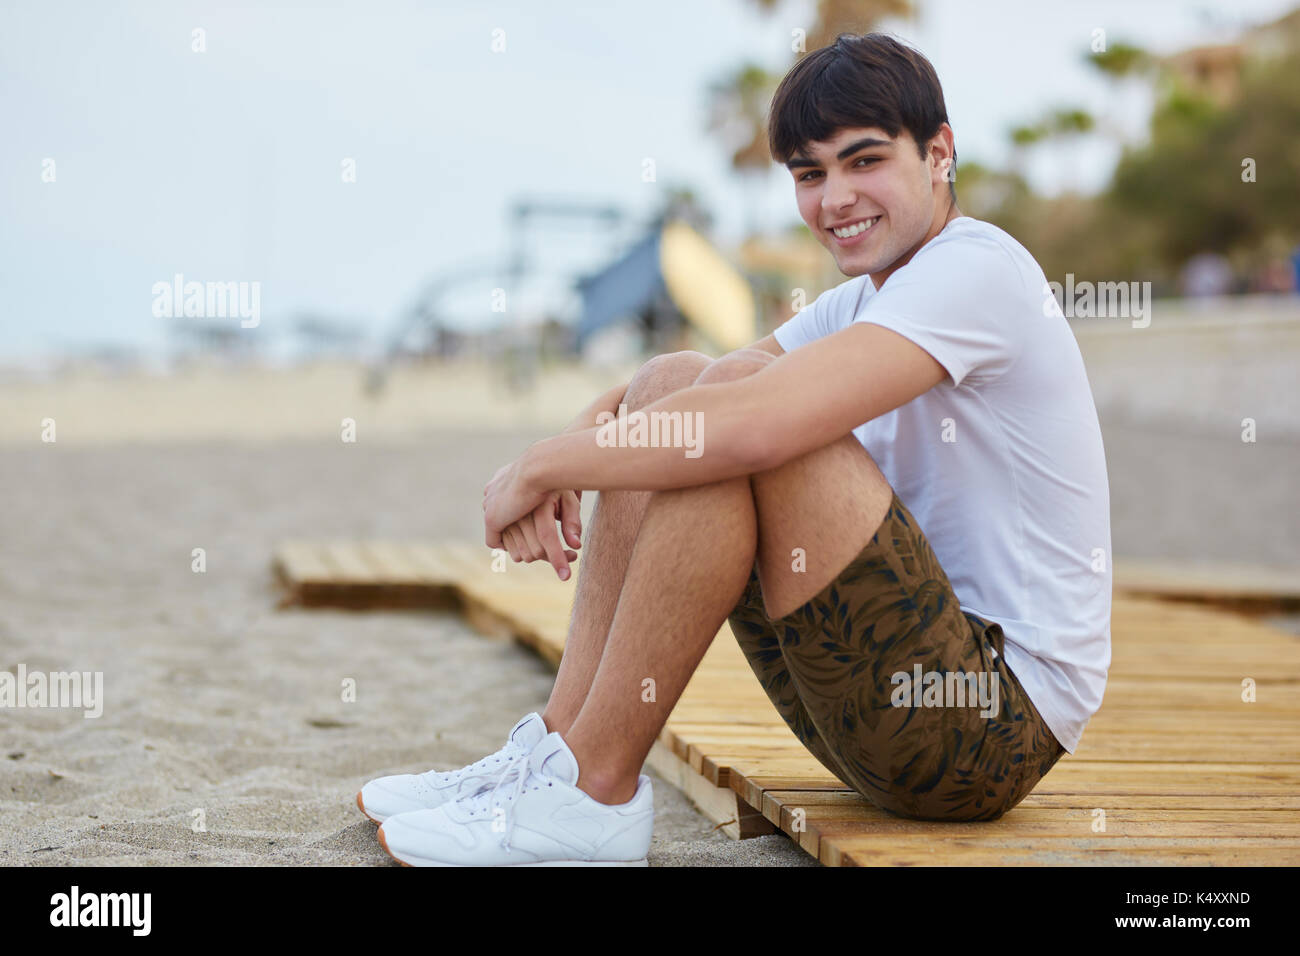 Portrait of young man sitting on beach smiling Banque D'Images